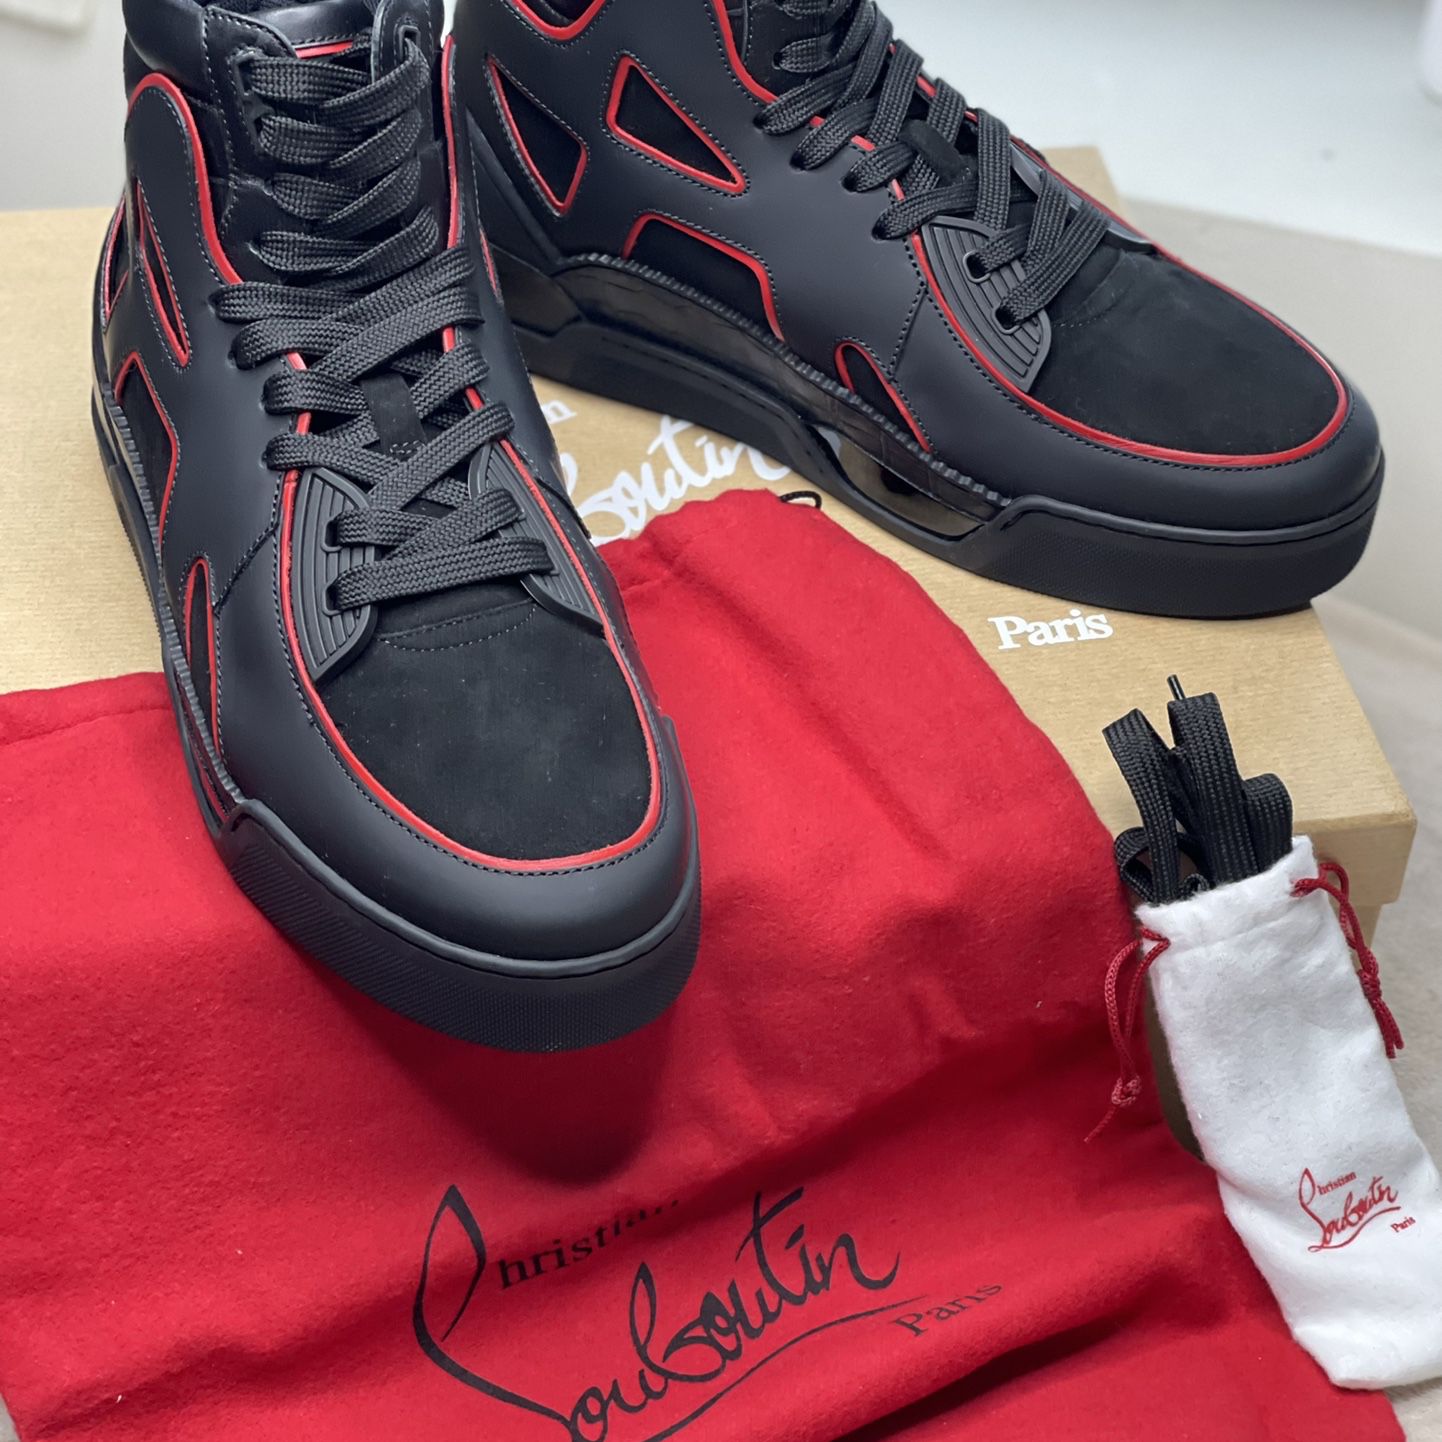 Christian Louboutin Red Bottom Sneakers size 40 (8) for Sale in New York,  NY - OfferUp